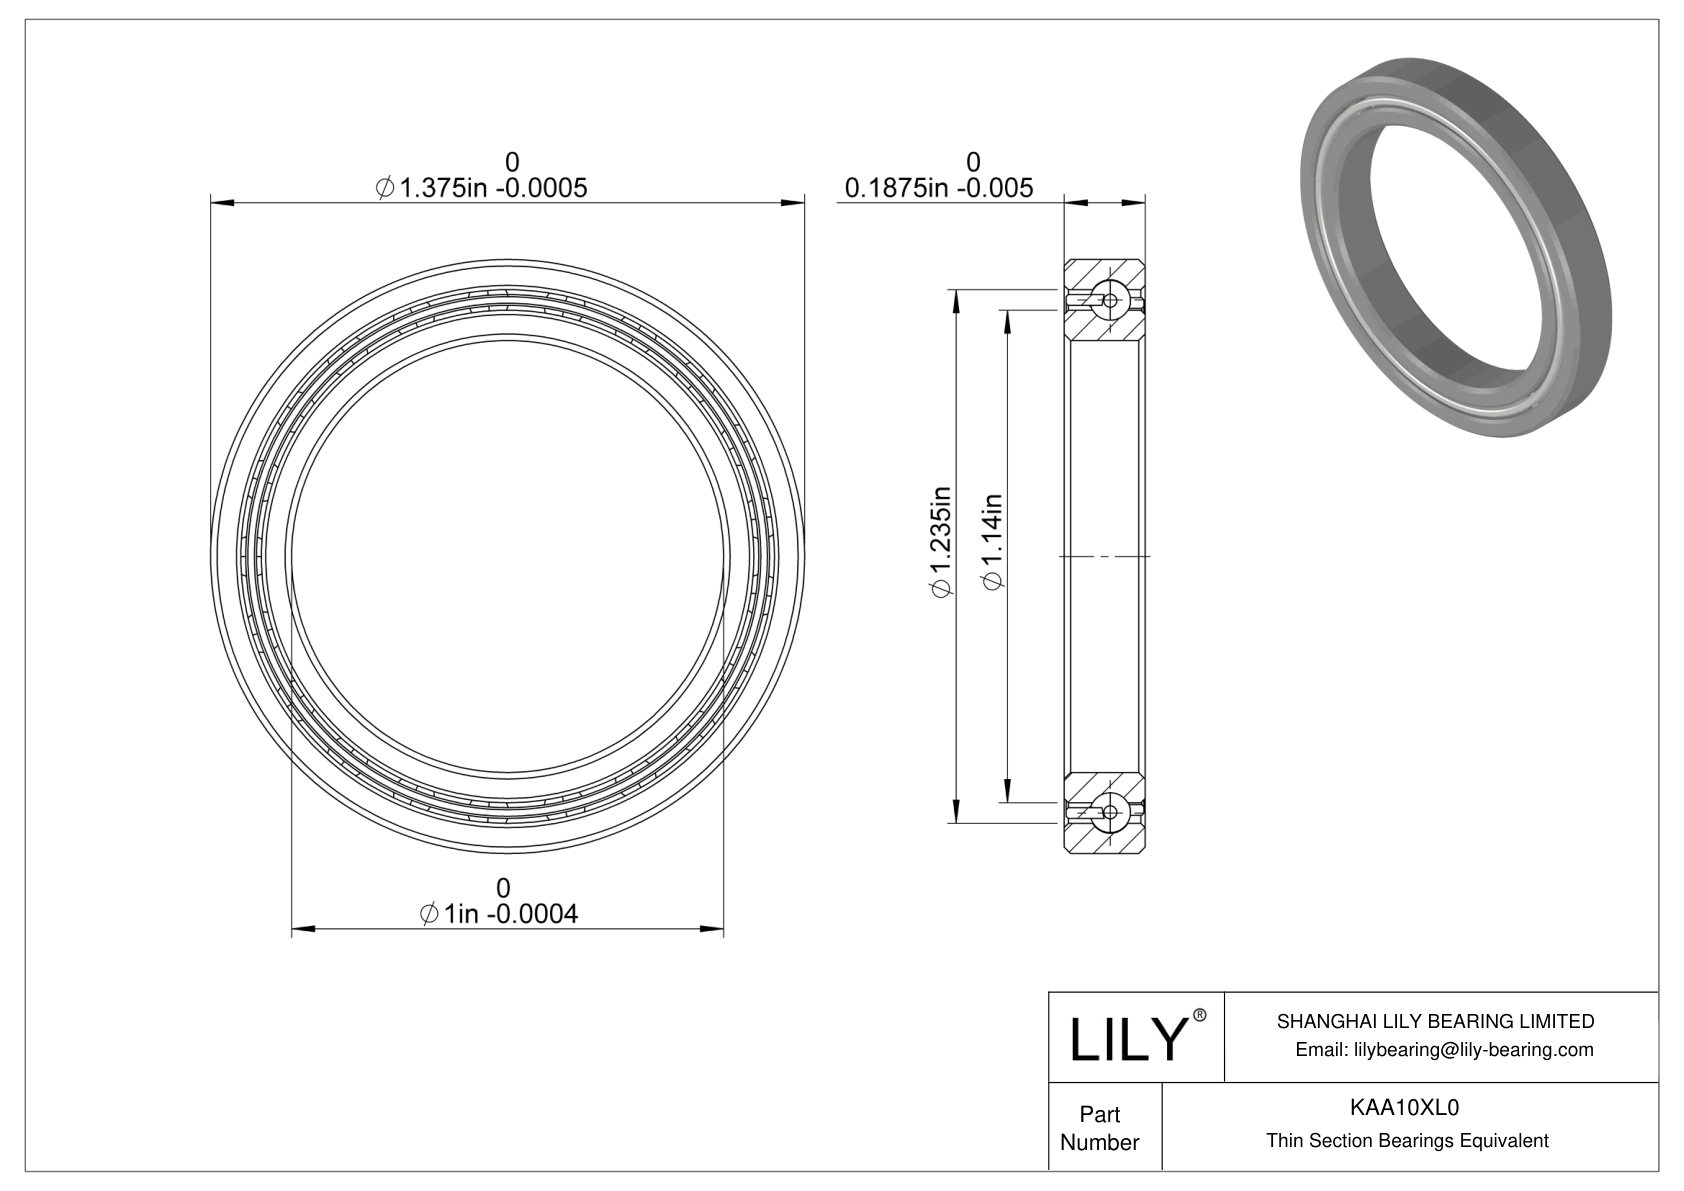 KAA10XL0 Constant Section (CS) Bearings cad drawing